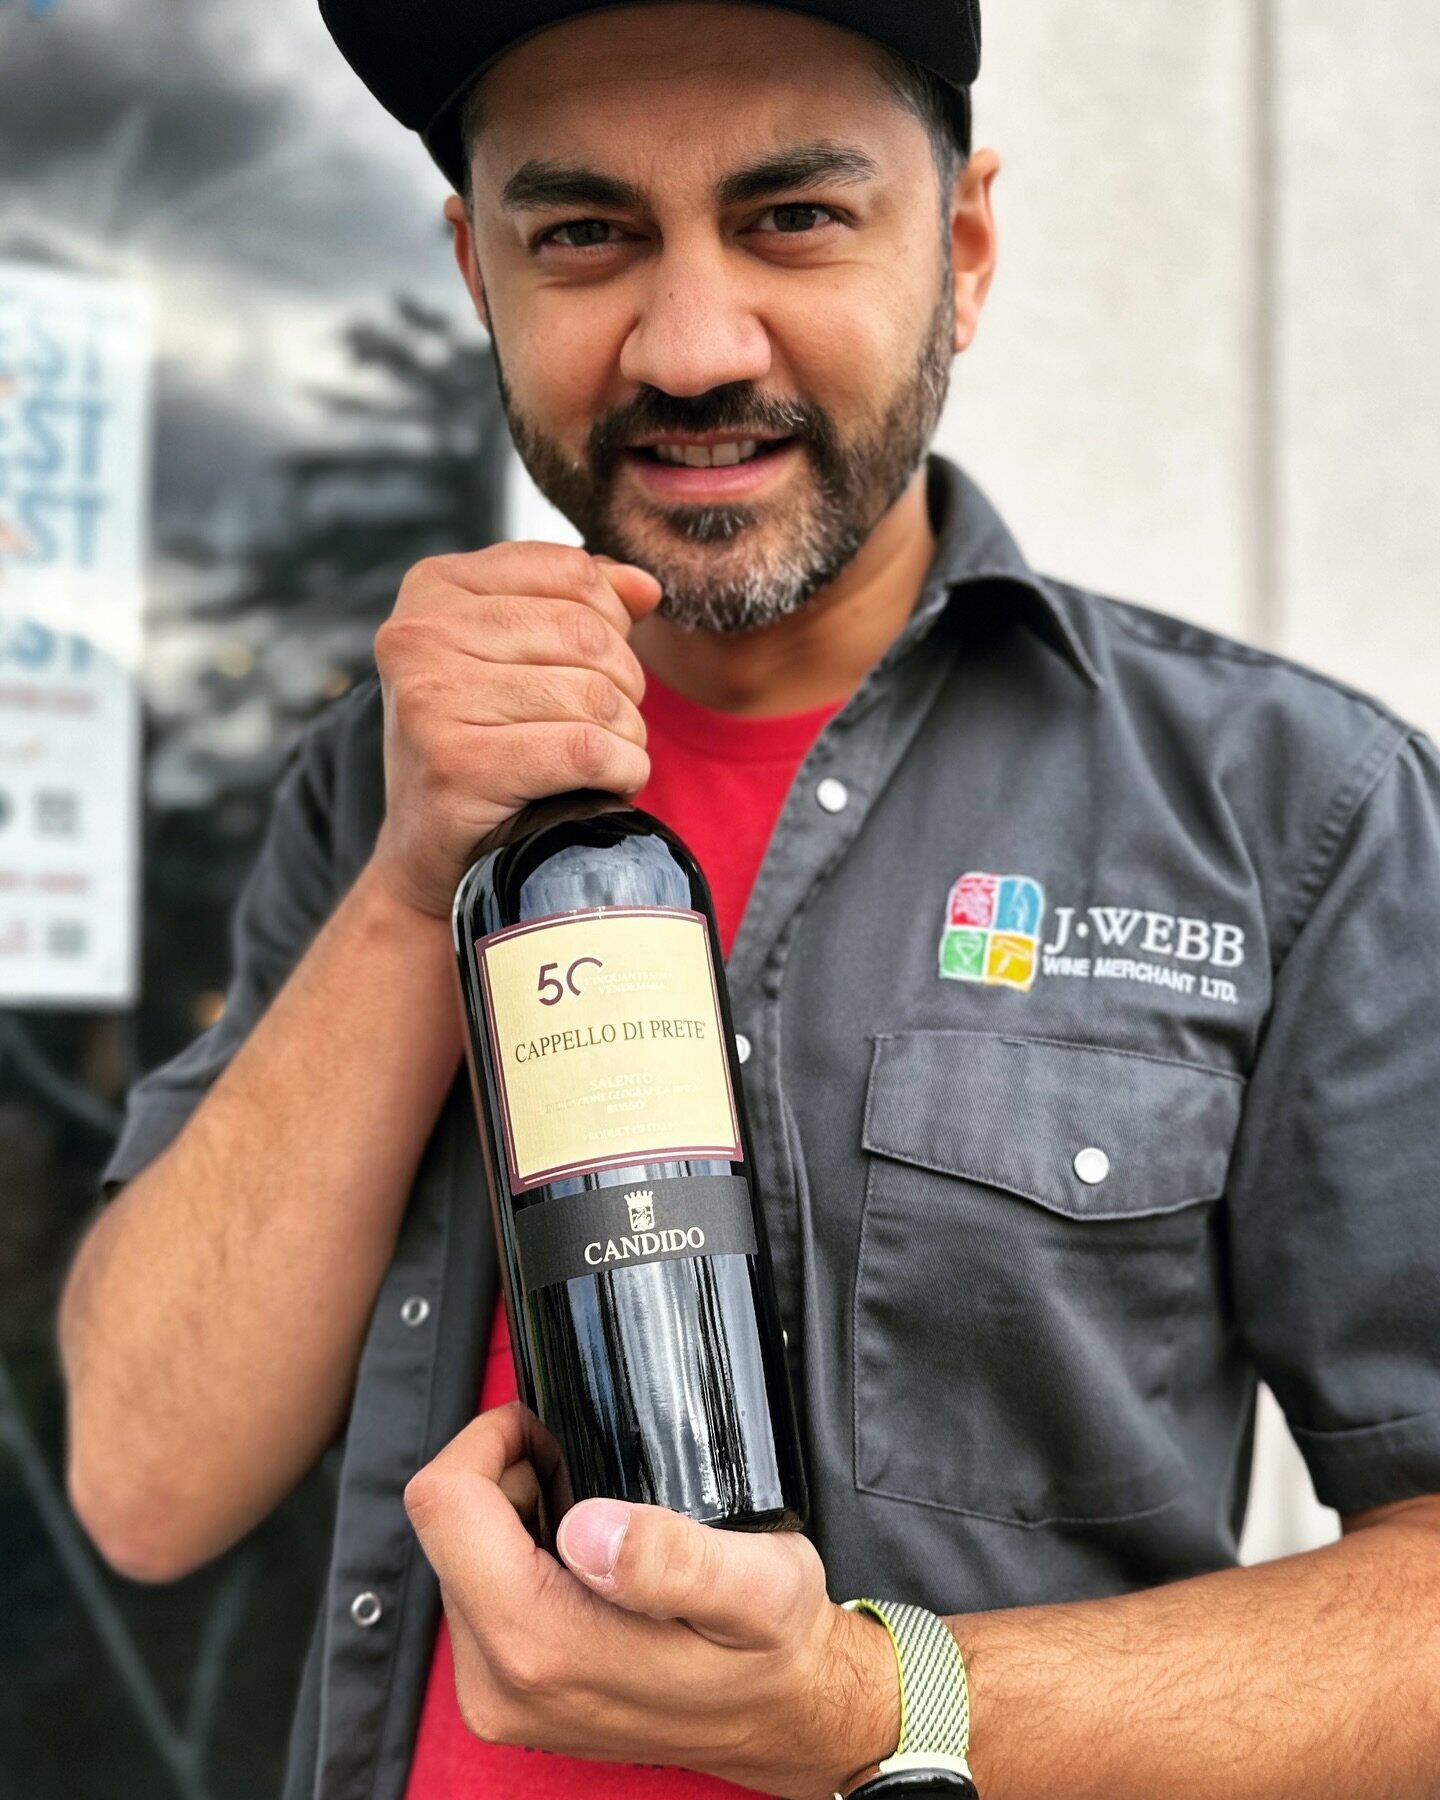 Happy Sunday pals! We want to introduce you to the iconic Cappello di Prete from Candido winery in Salento.

We have loved the wines from Candido for decades and are truly honoured to be the only shop in Alberta to carry them.

&ldquo;The Candido Cap